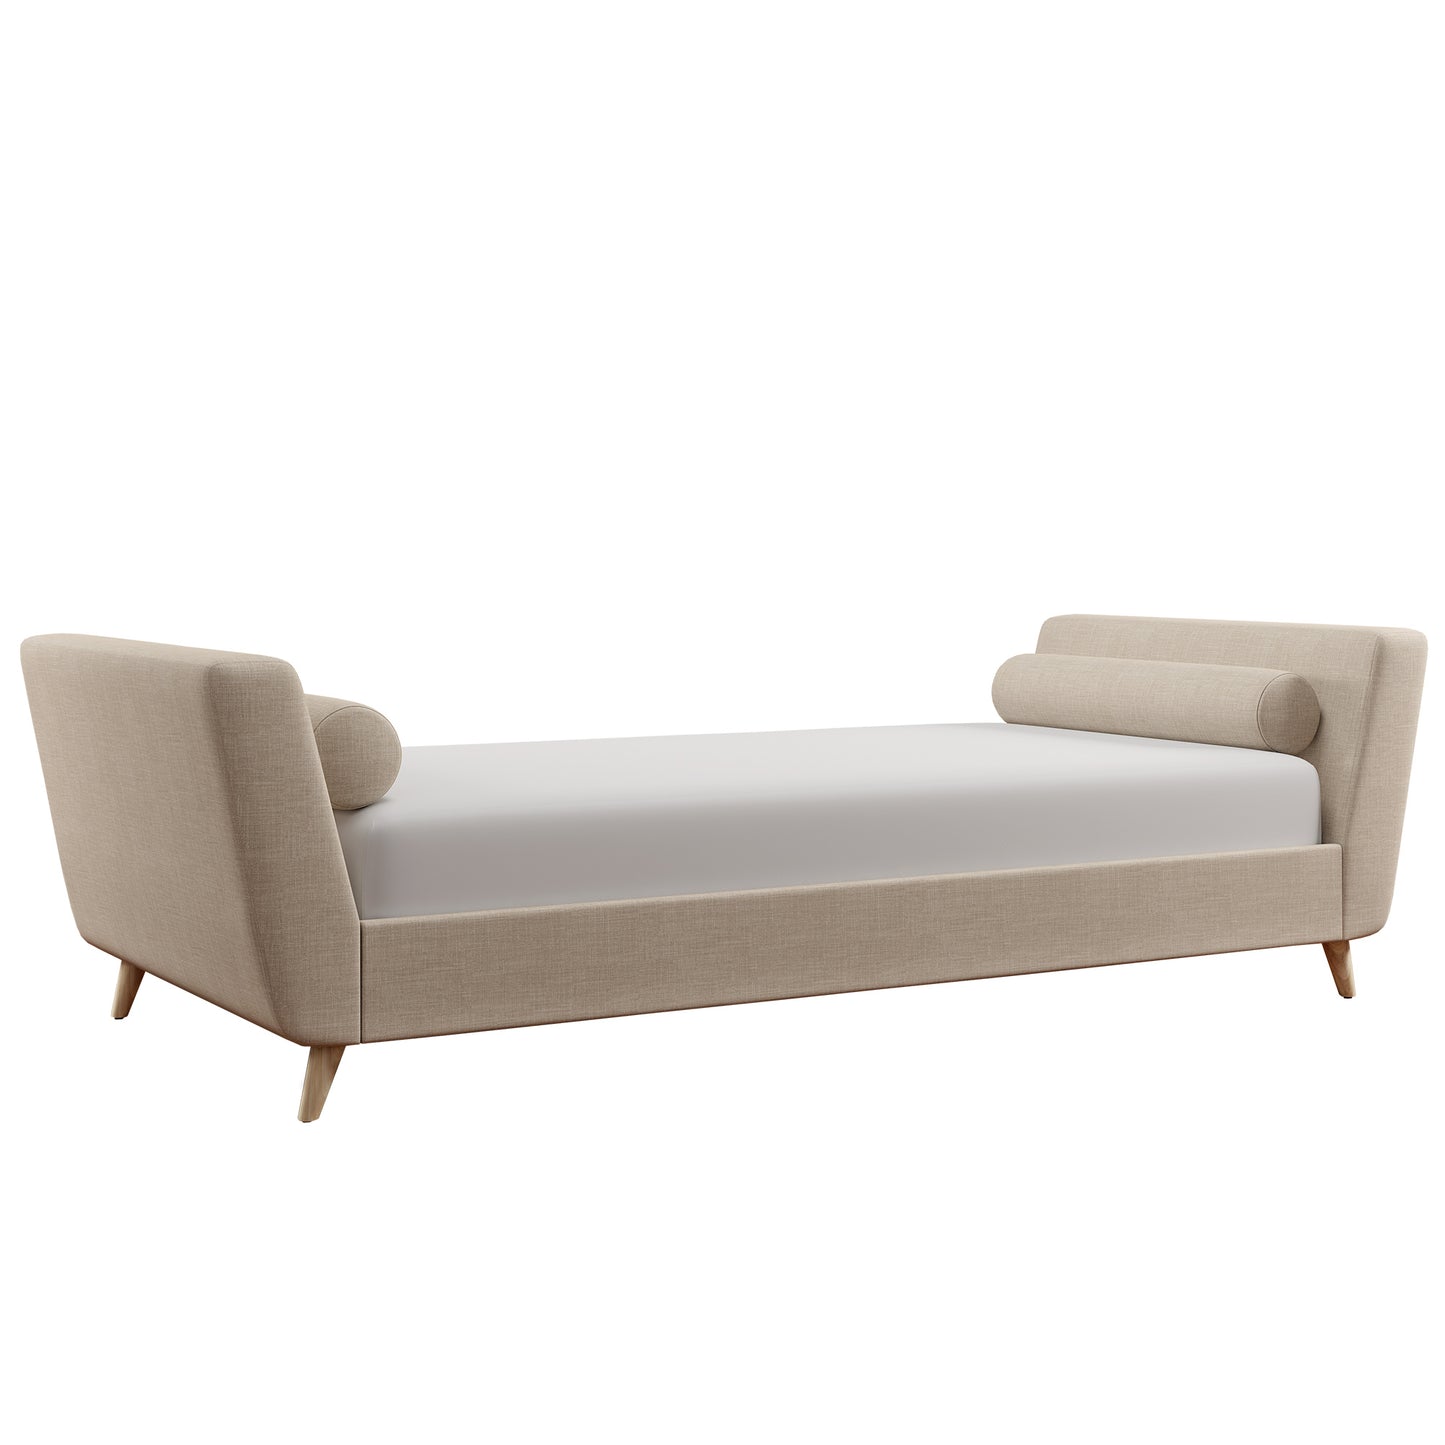 Linen Fabric Daybed - Beige